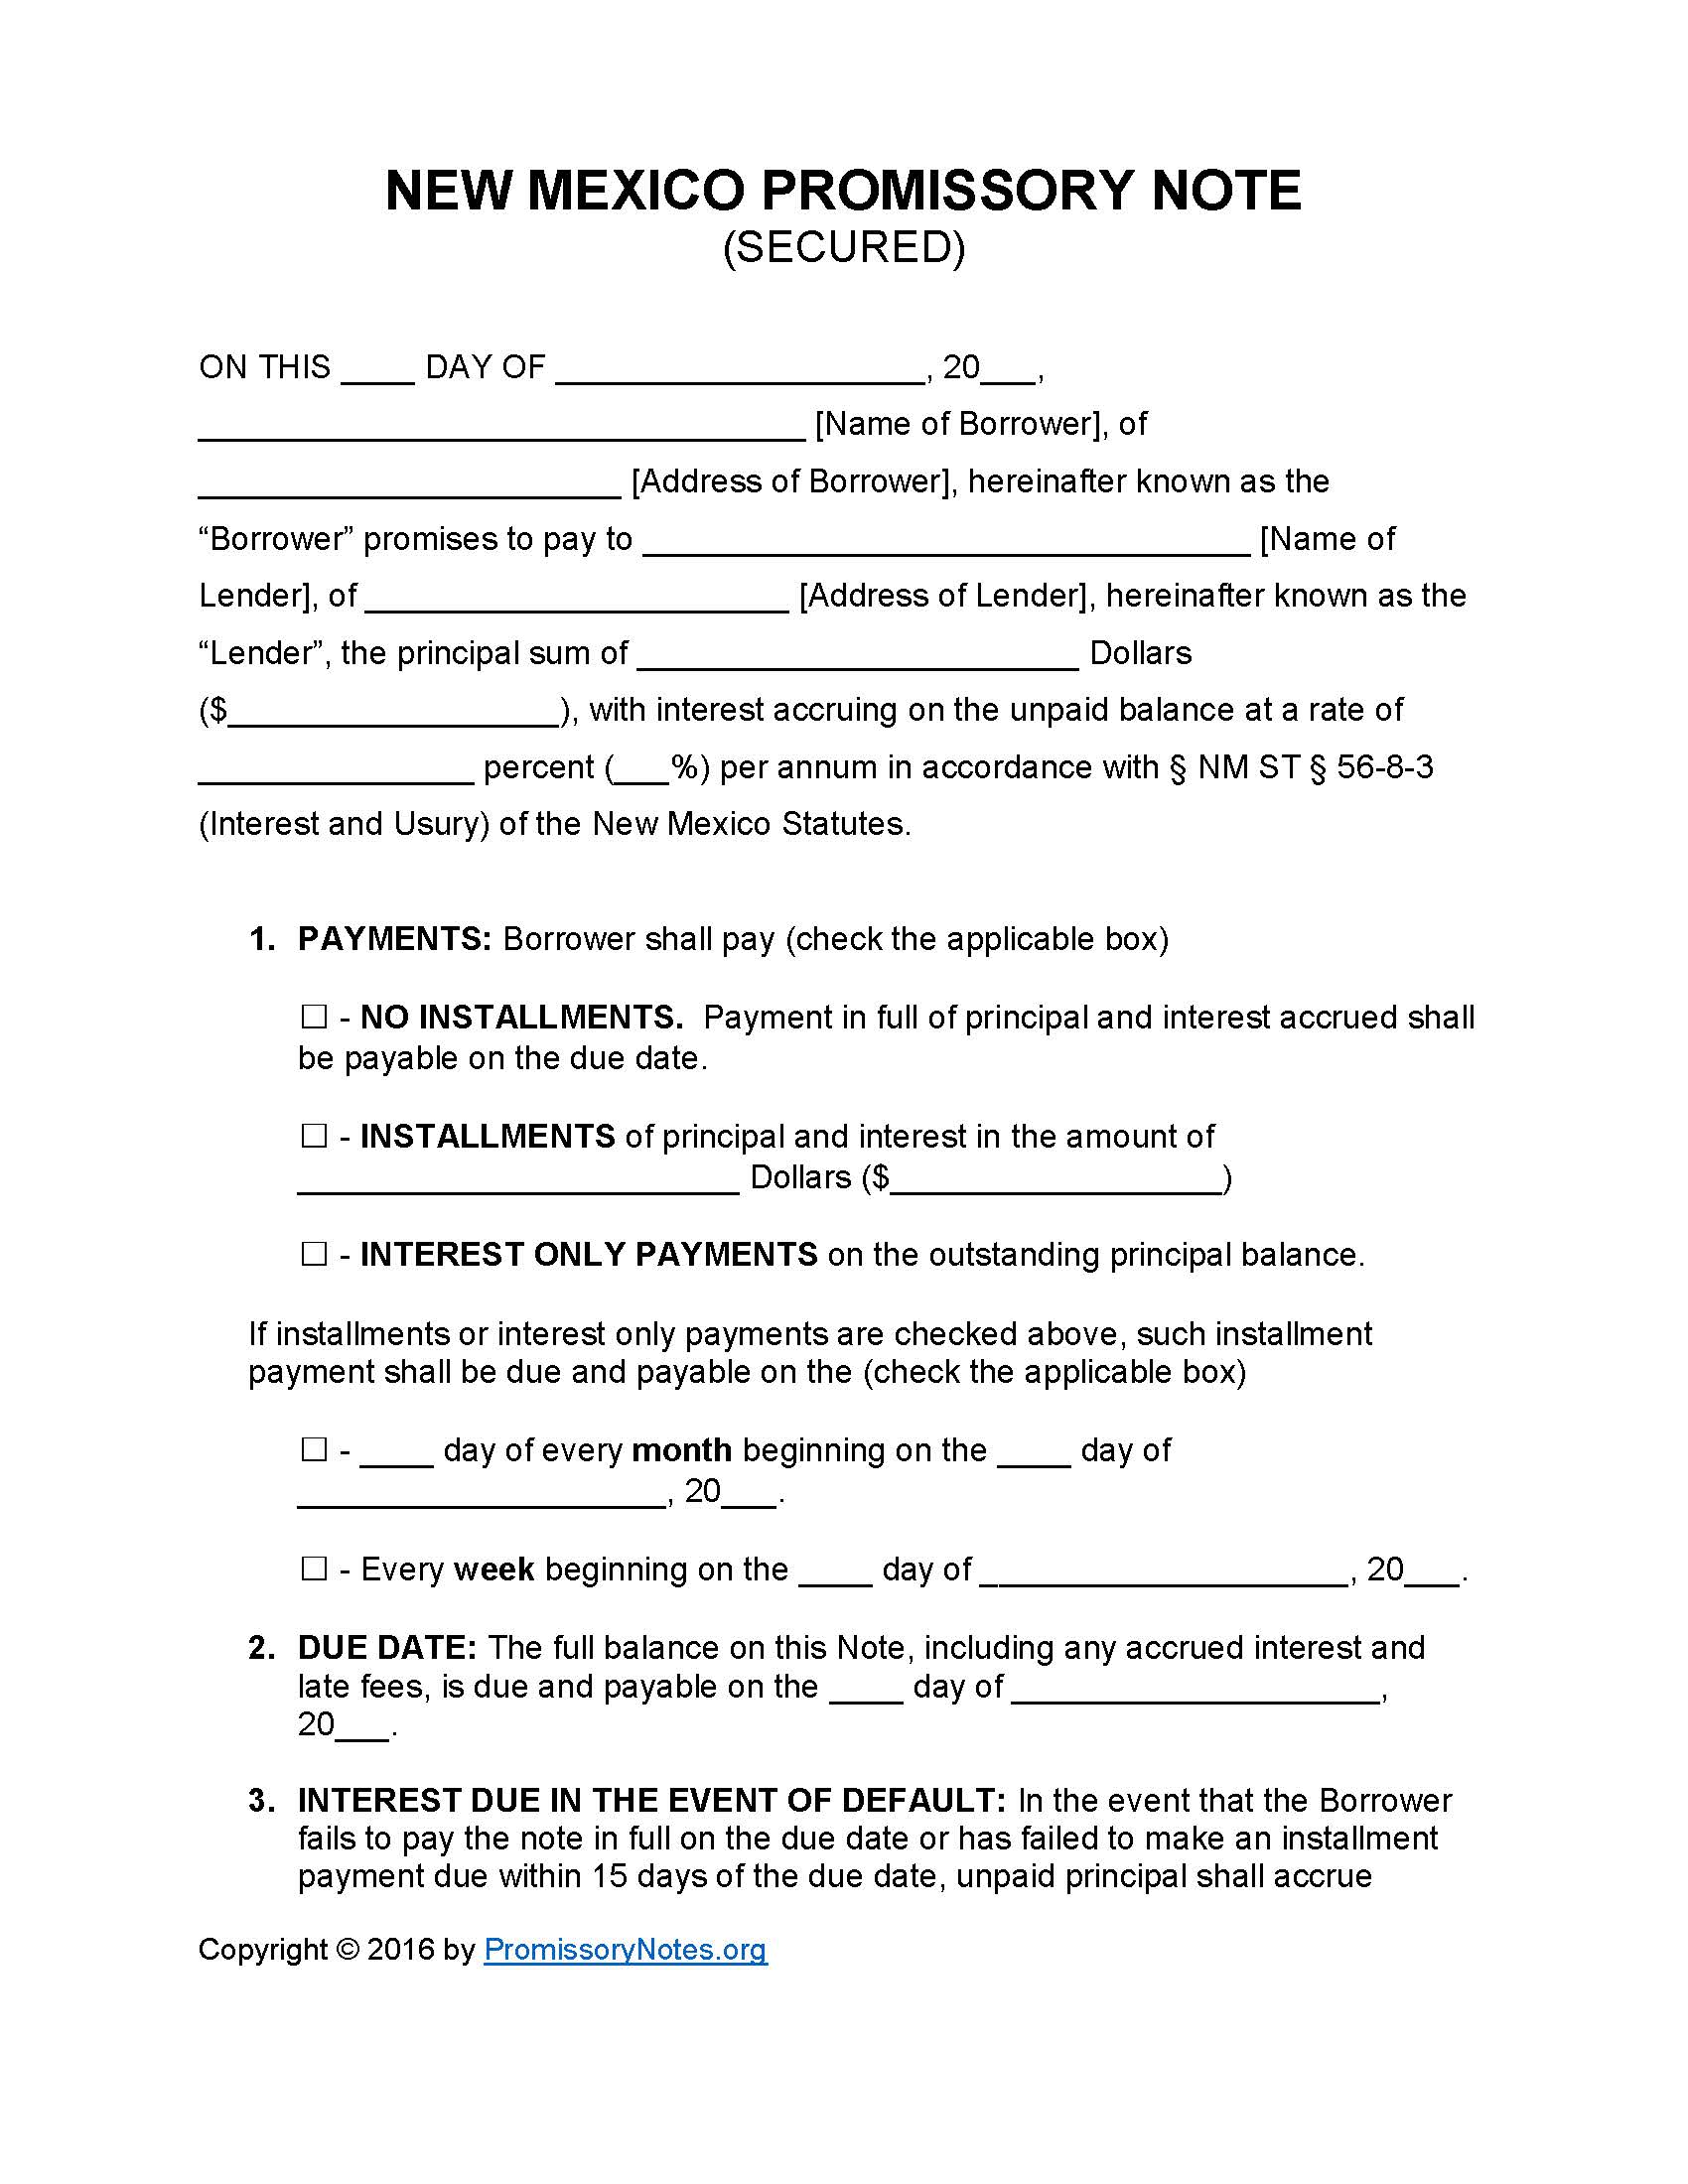 new-mexico-secured-promissory-note-form